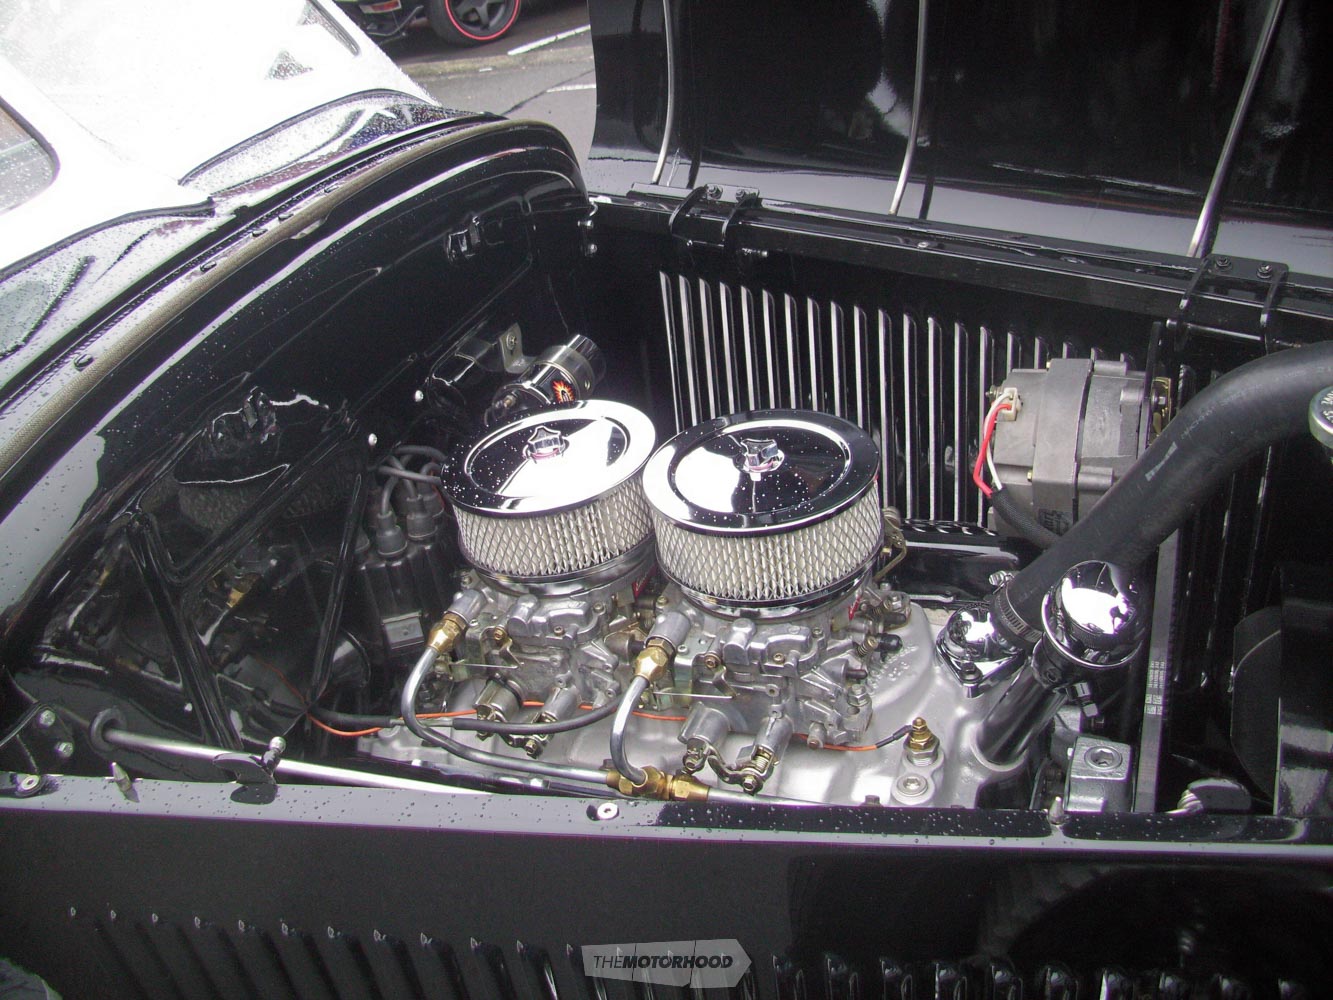 Didnt have any infor on the motor at all but like everything else it was immaculate.jpg